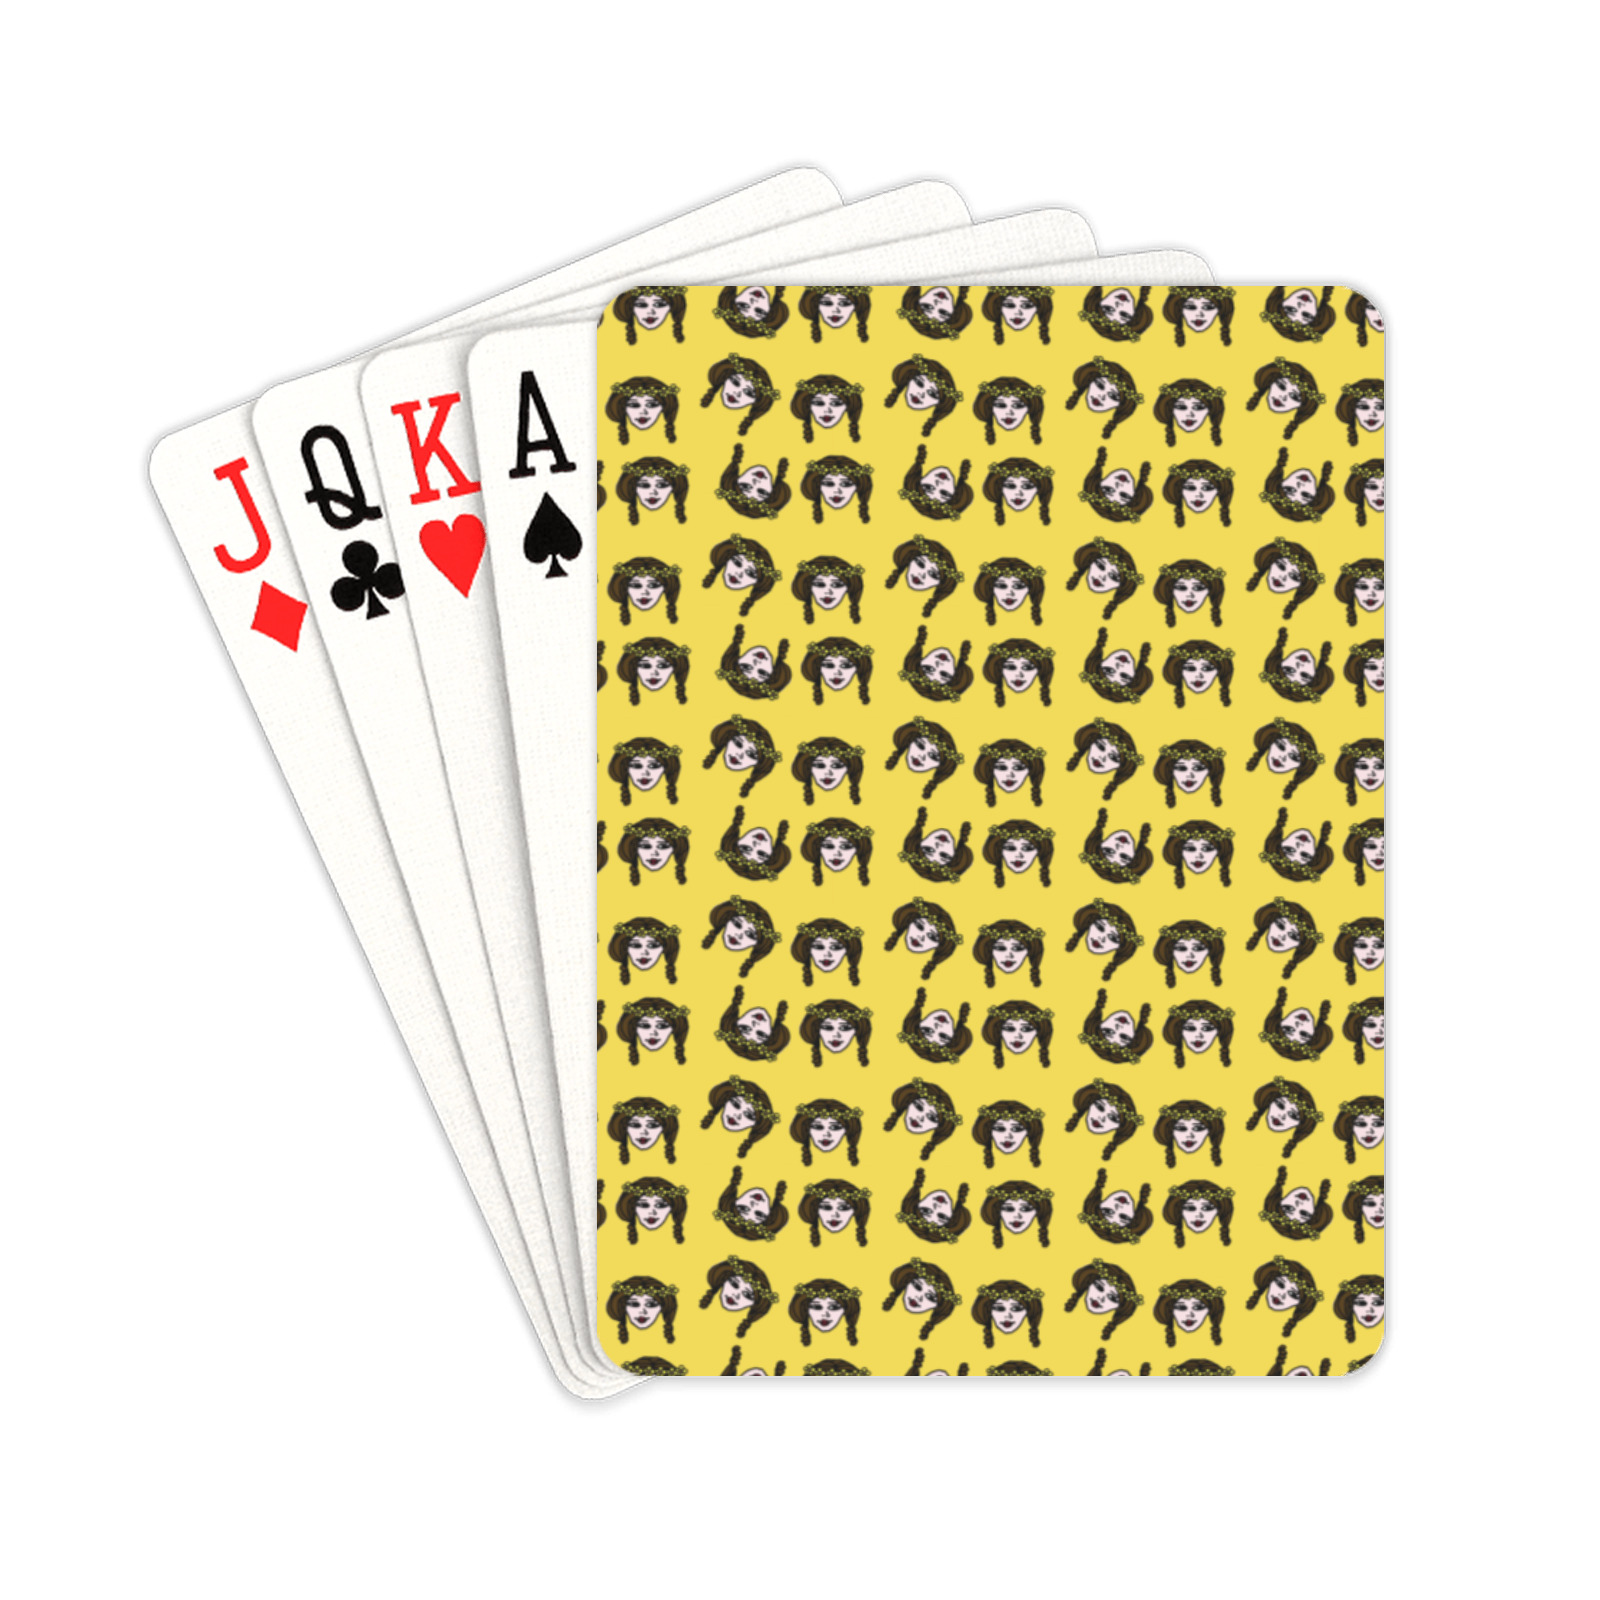 retro girl daisy chain pattern yellow Playing Cards 2.5"x3.5"